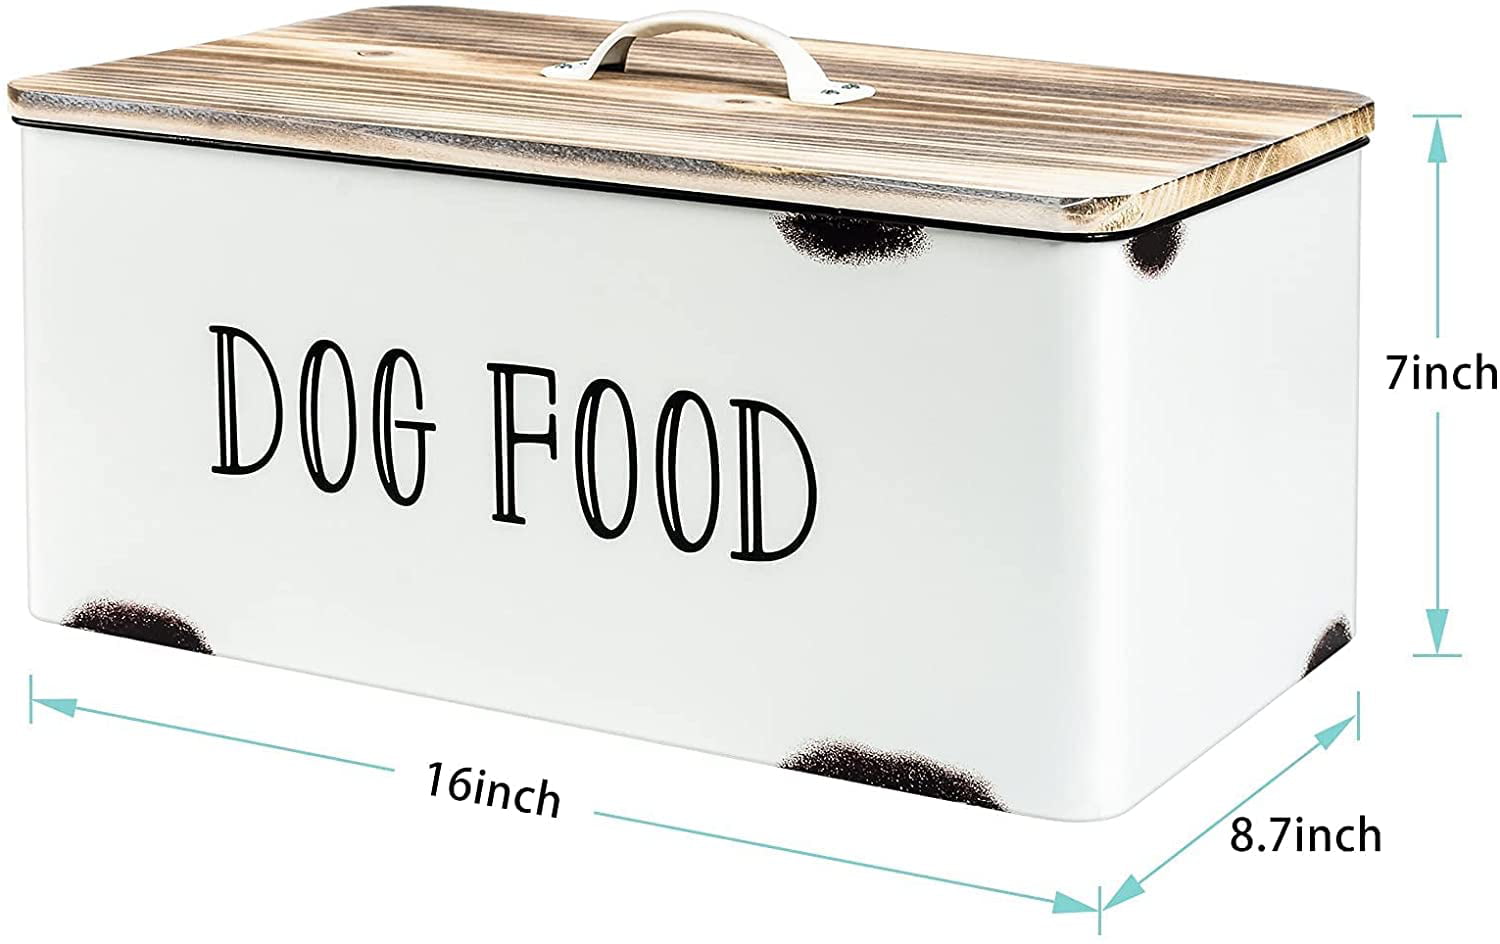 Wooden Doggy Food Bin: Small-medium Storage Box for Dry Pet Food and Bulky  Food Items 40 X 33 X 22cm 